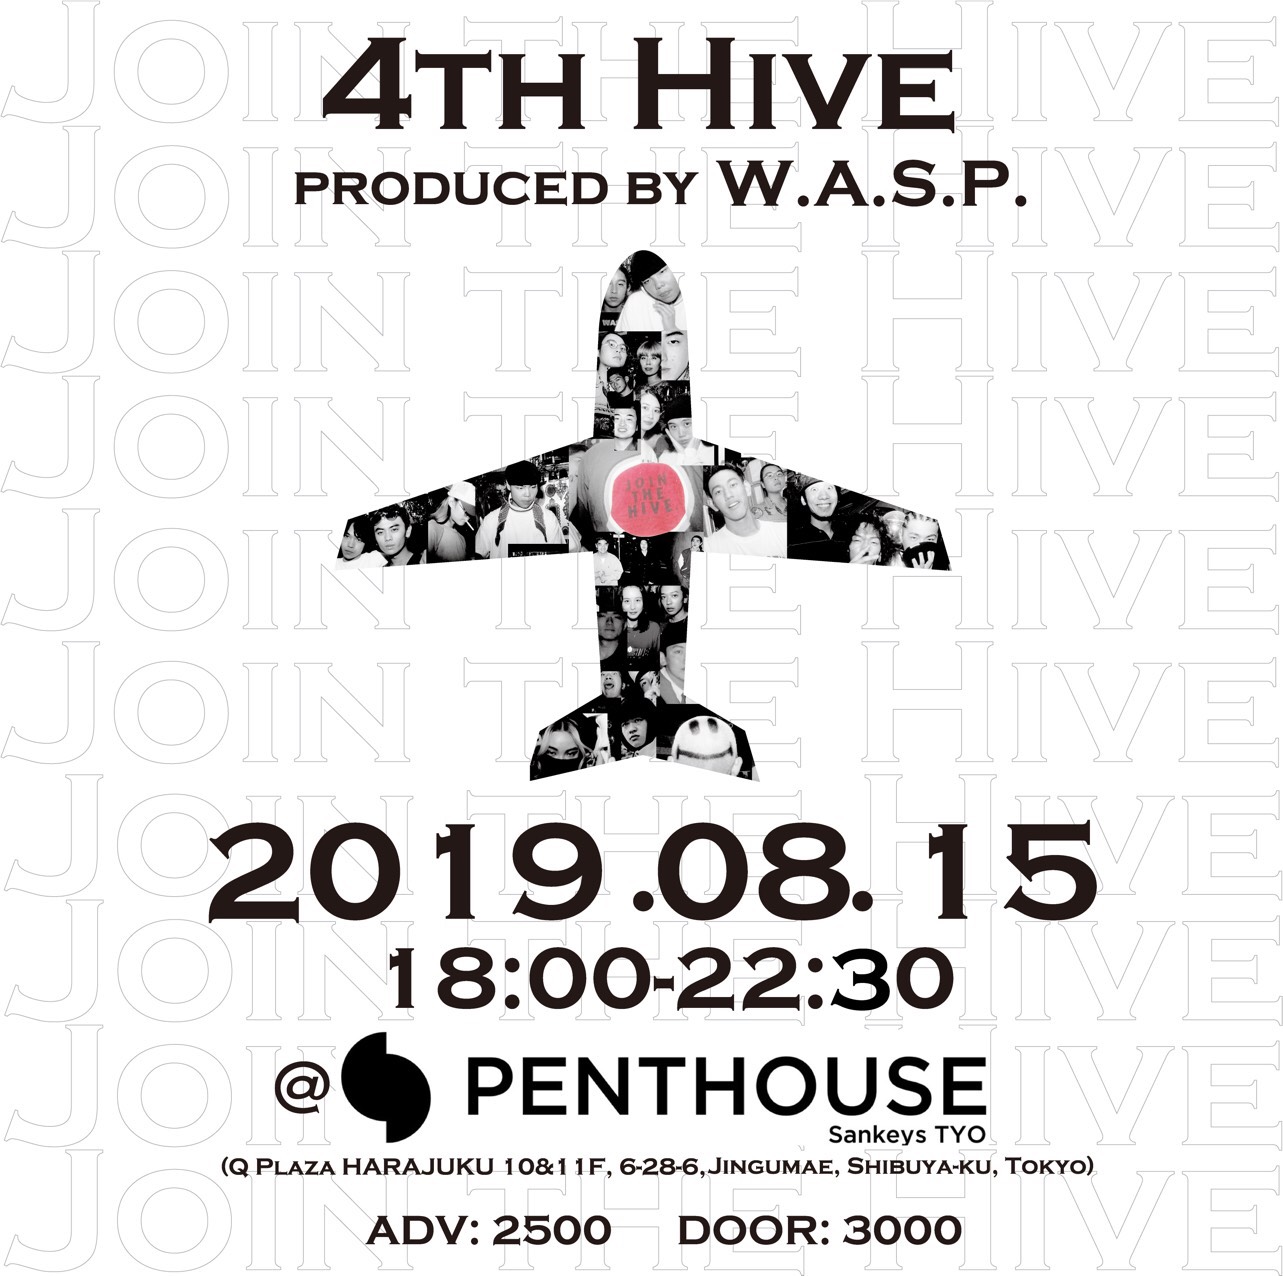 4TH HIVE PRODUCED BY W.A.S.P.